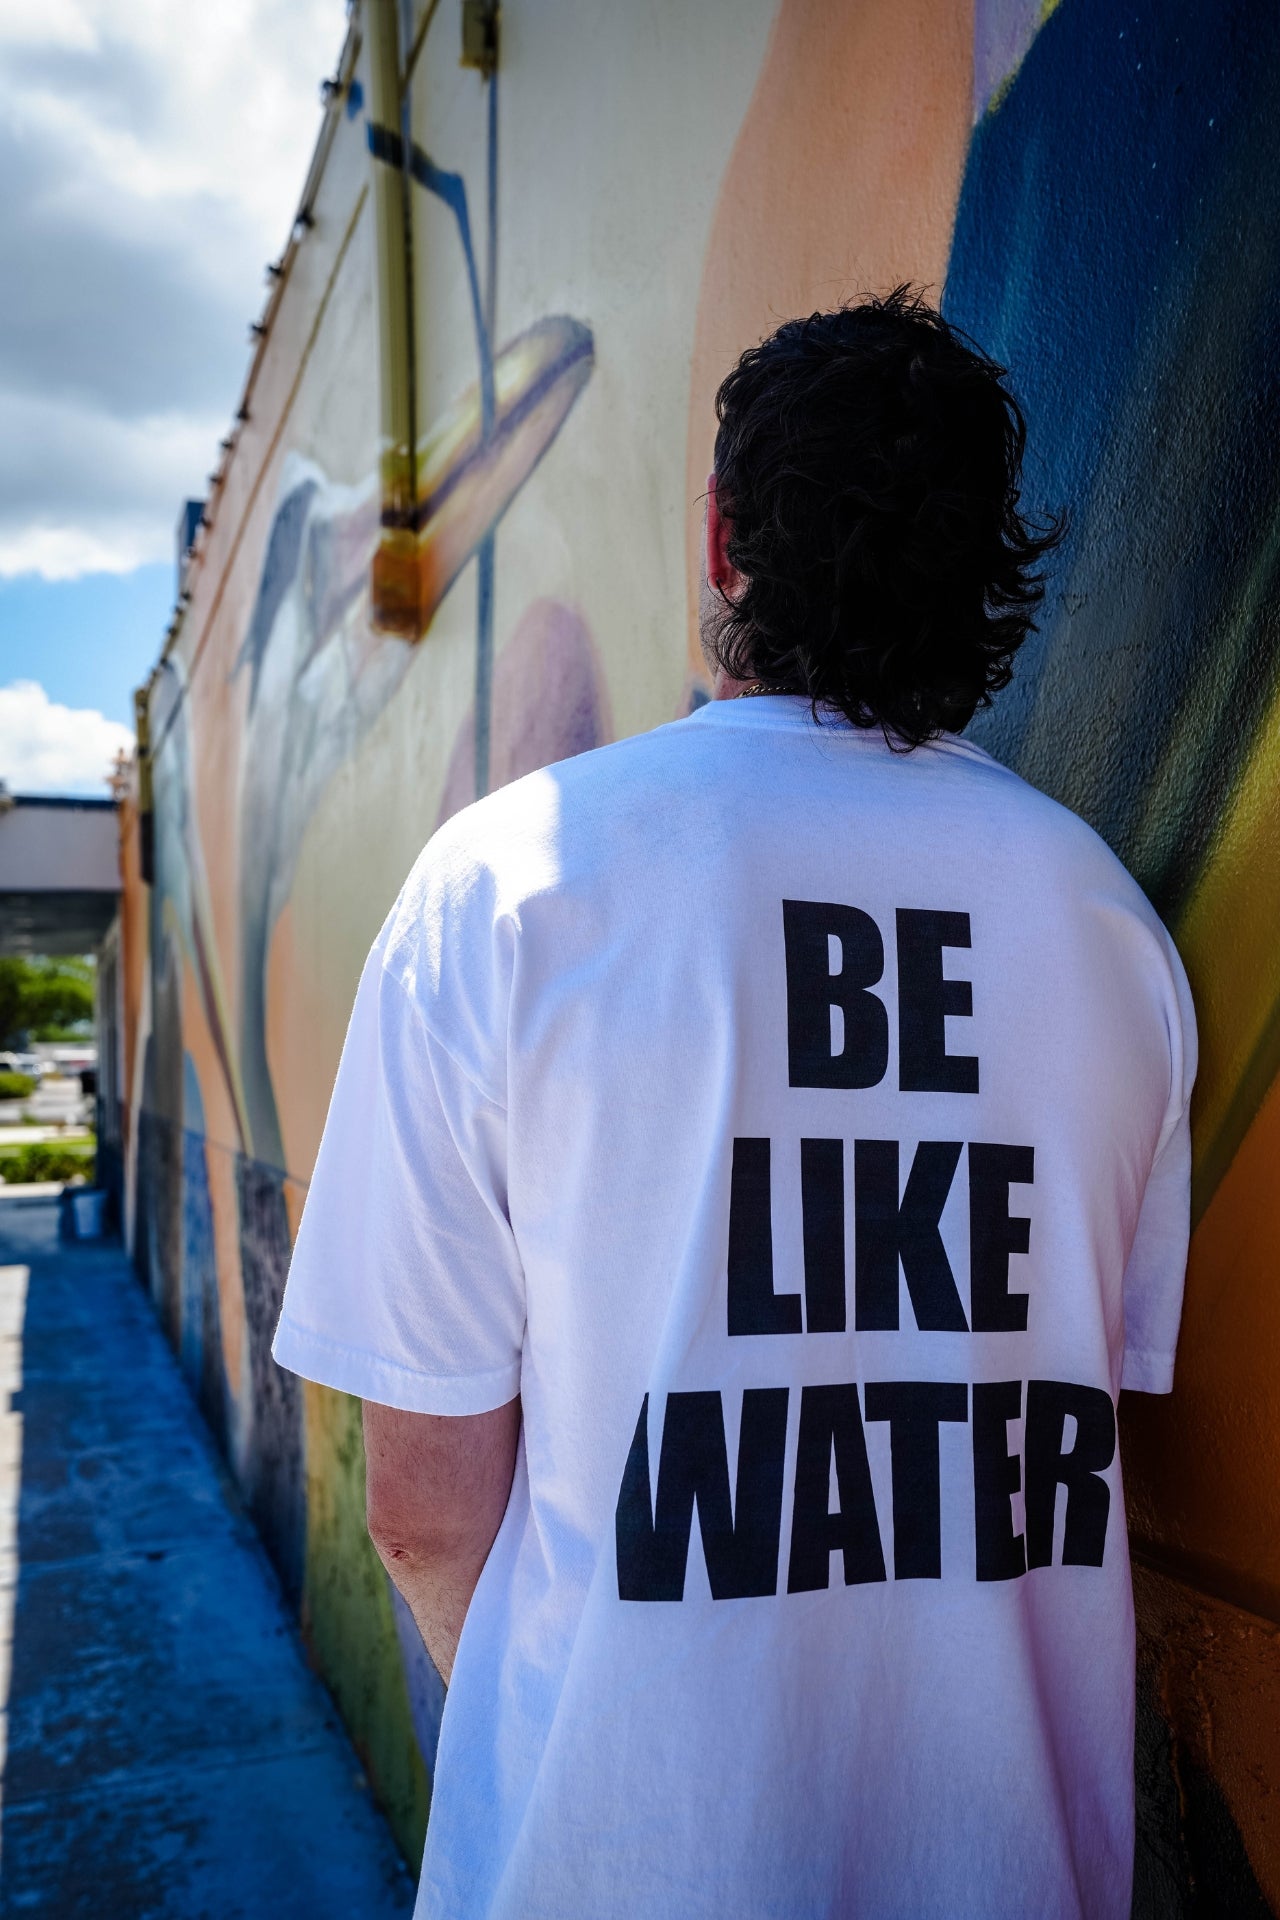 UNCIVILIZED "BE LIKE WATER" T-SHIRT